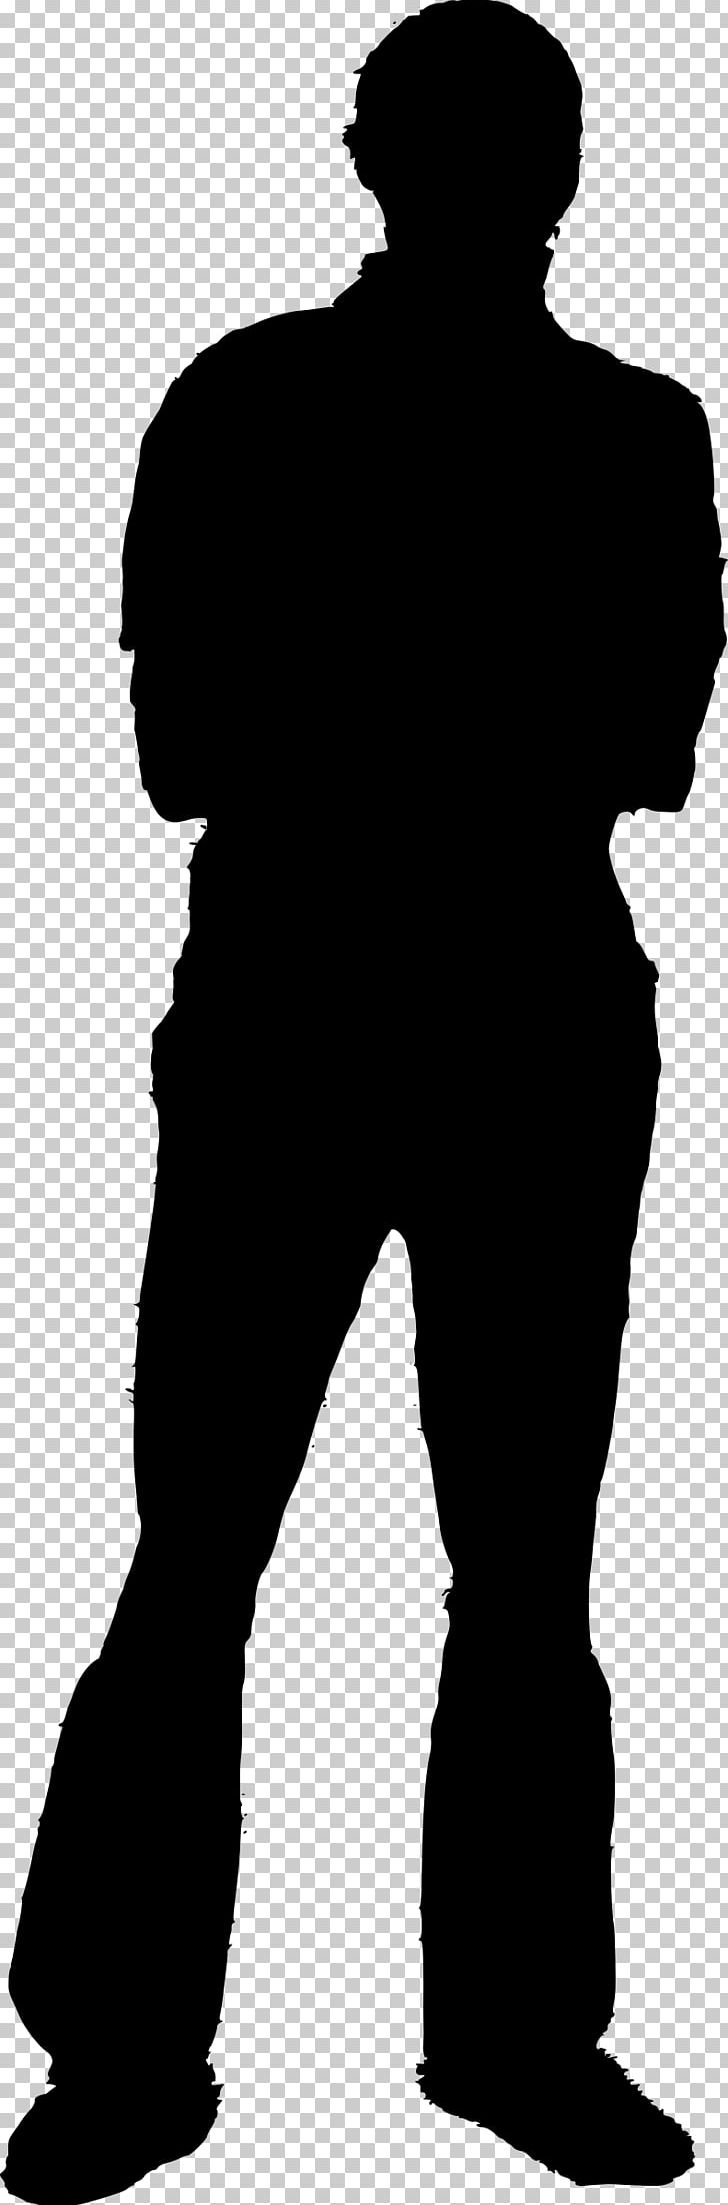 Silhouette Human Figure PNG, Clipart, Animals, Art, Black, Black And White,  Black Man Free PNG Download